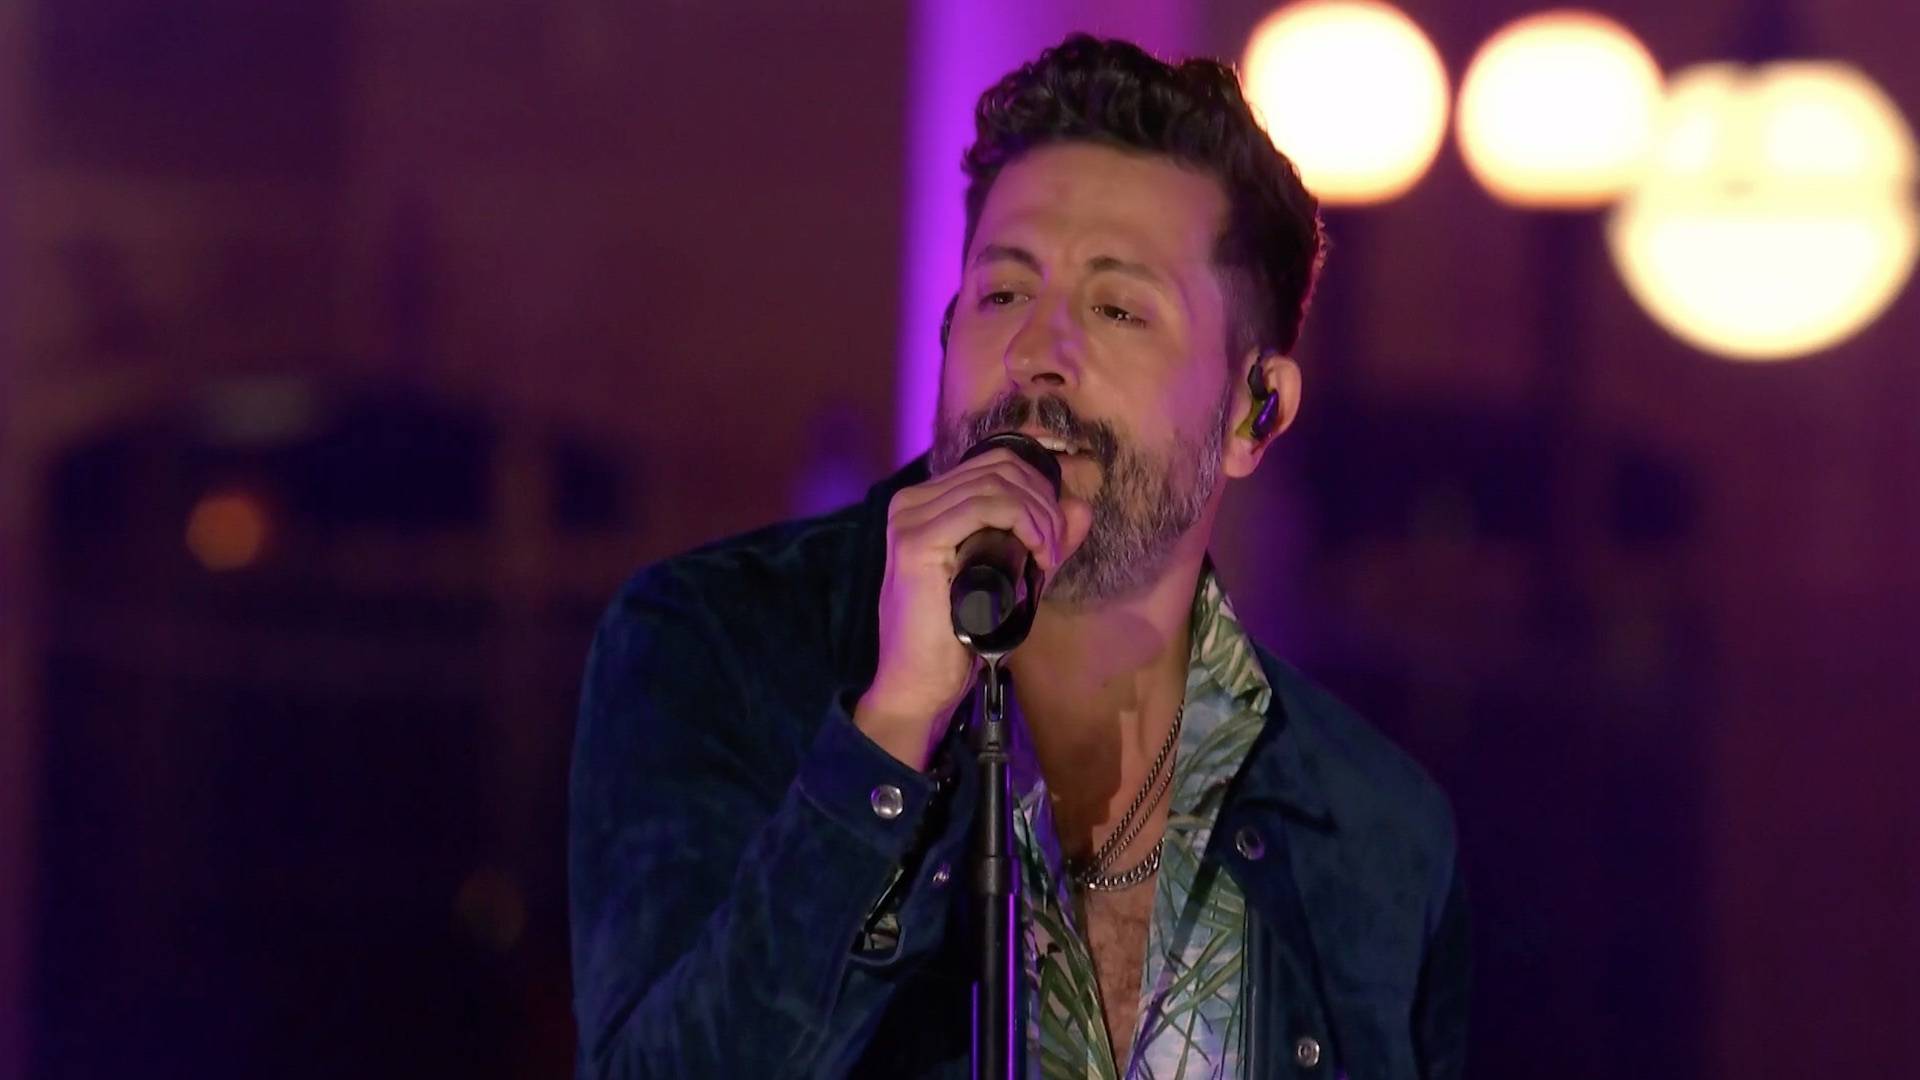 Country music band Old Dominion delivers a performance of their bittersweet song "No Hard Feelings" at the CMT Music Awards 2022.